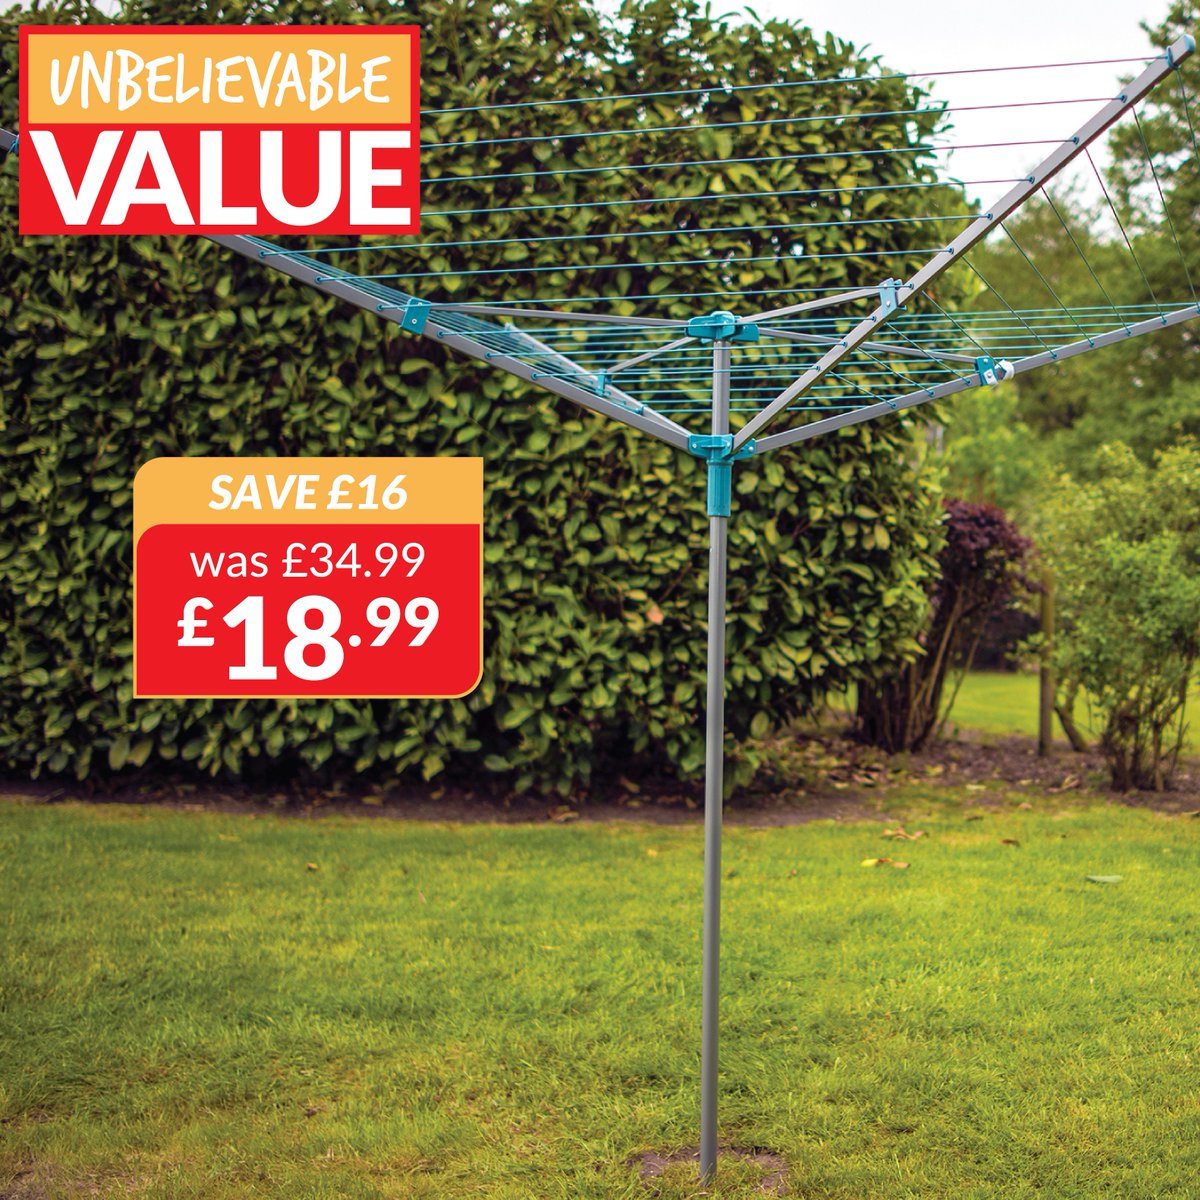 💥 UNBELIEVABLE VALUE 💥 😍👉 Shop today & SAVE £16 OFF the My Home Four Arm Rotary Airer bit.ly/4dzImwS ✨ With 45 metres of drying space PLUS folds down when not in use! 🏃 ➡️ 🛒Available IN-STORES & ONLINE 🖱️ Click & Collect available in as little as 1 hour!